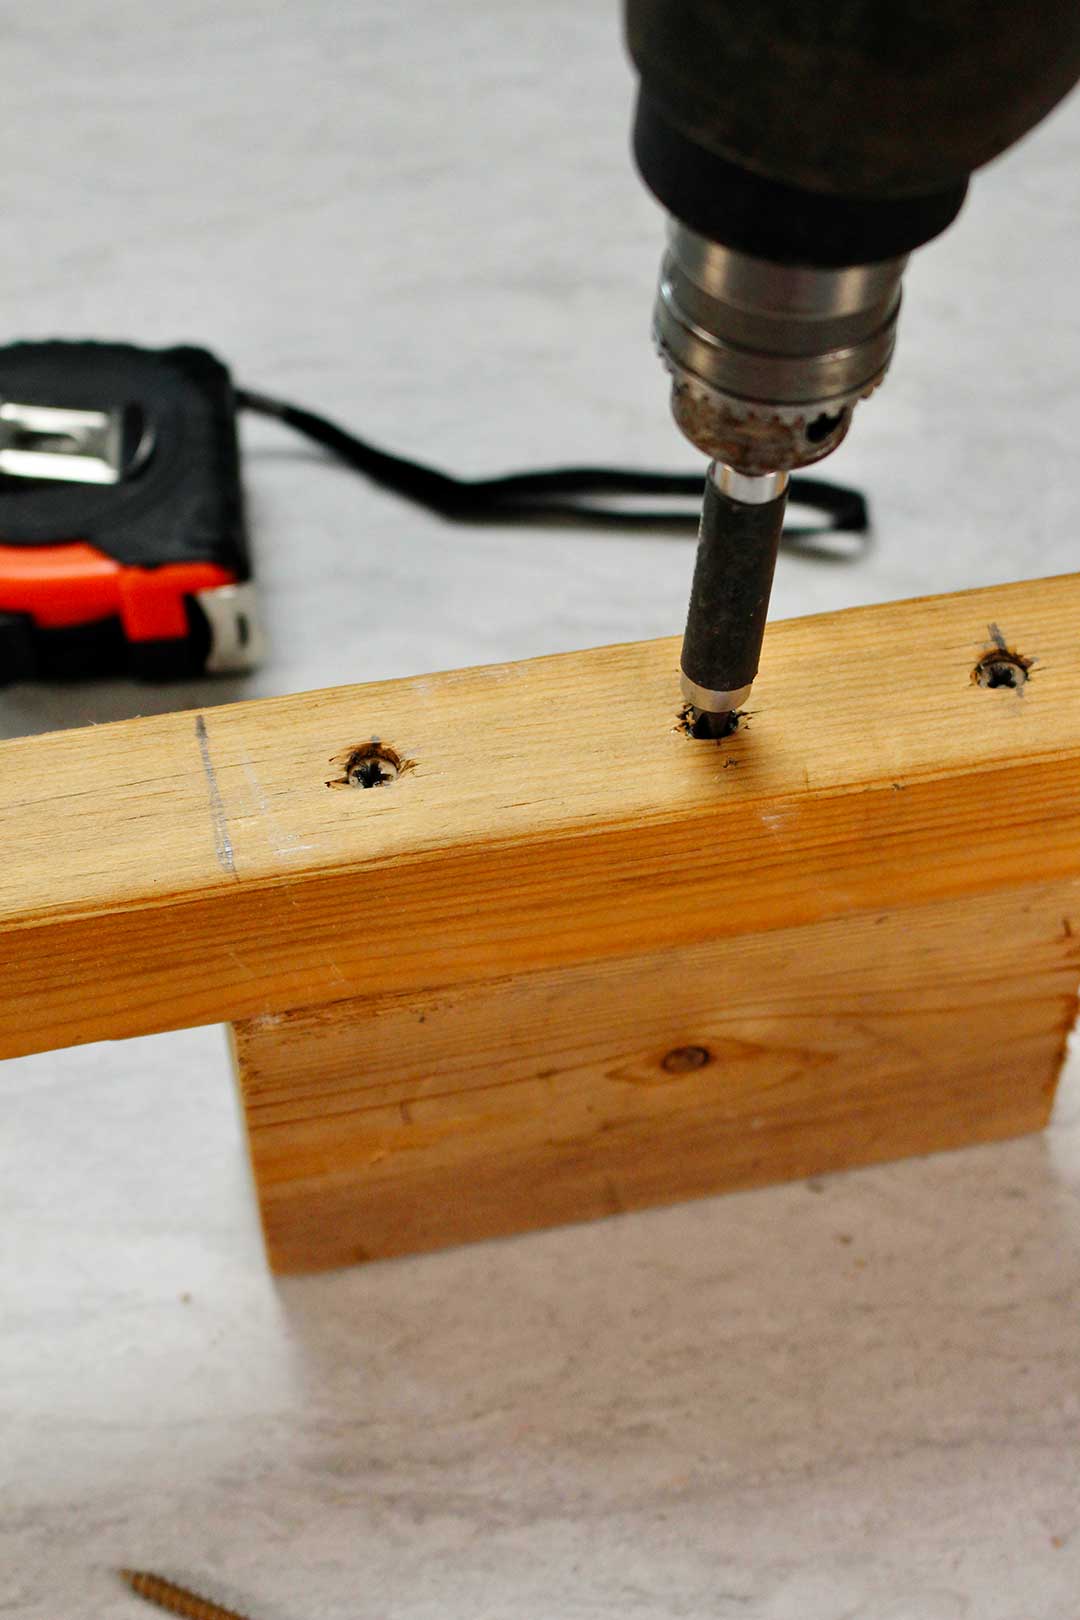 Close up image of drill screwing screws into wood pieces.